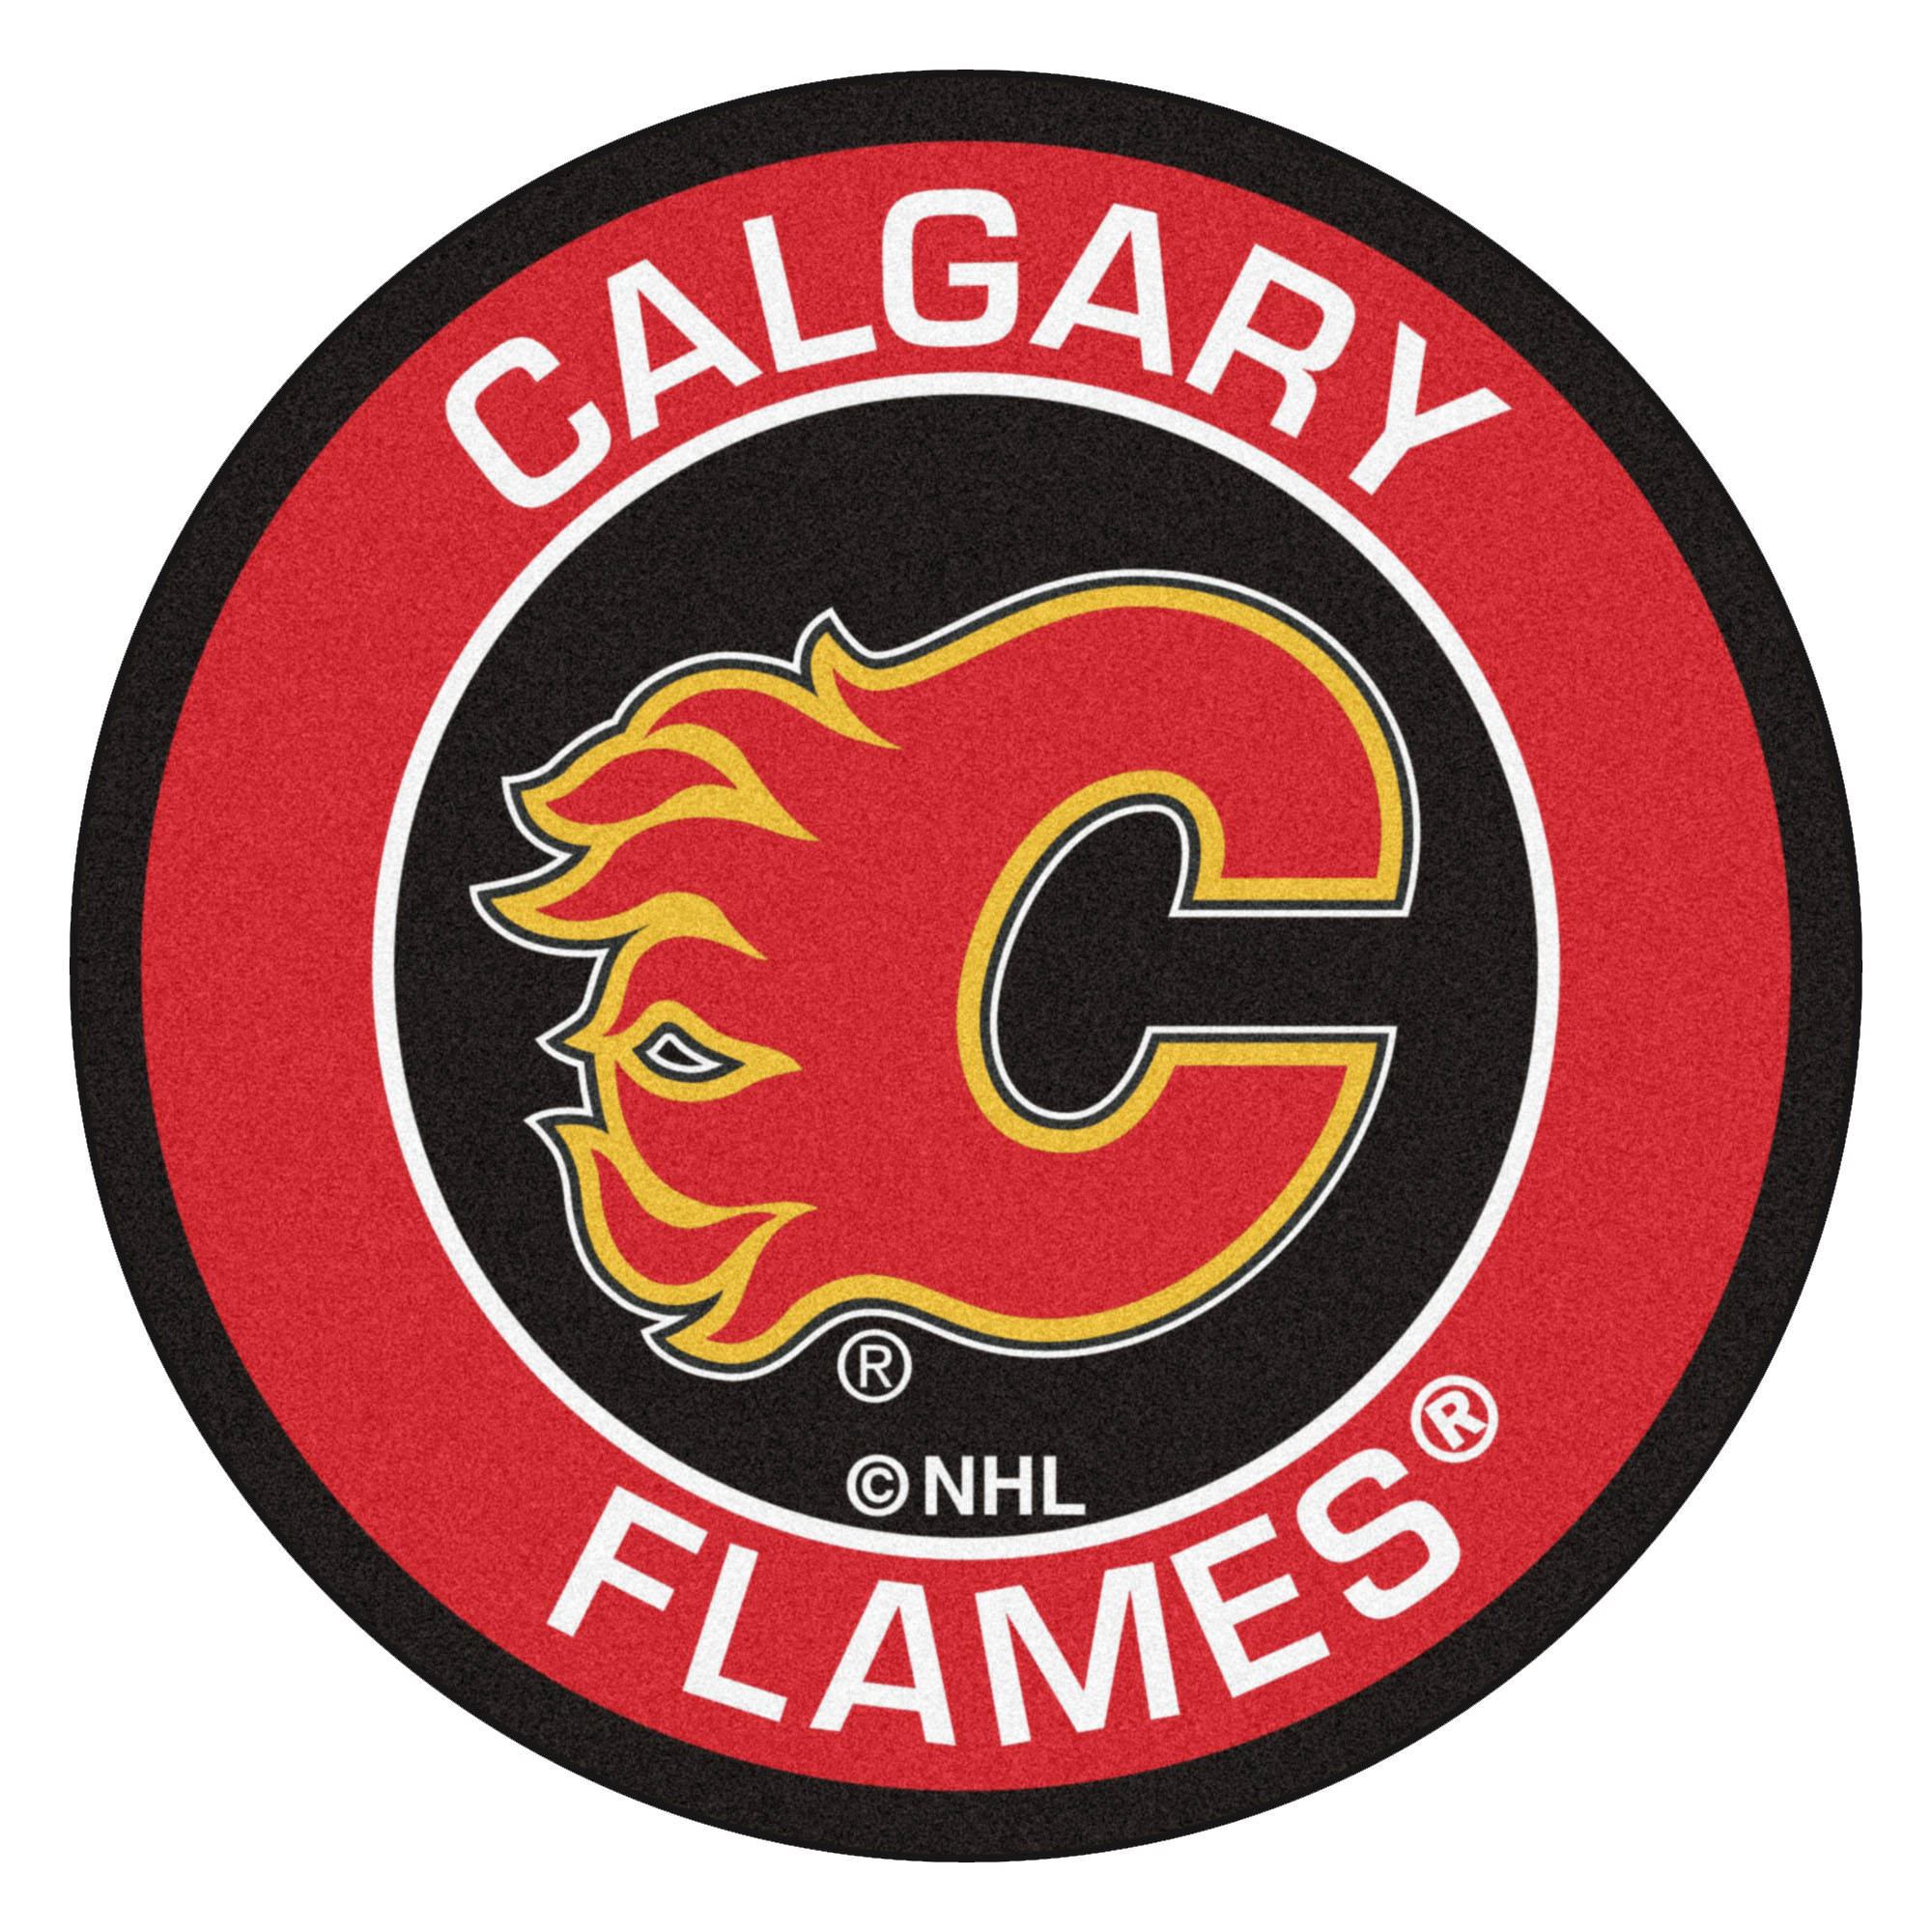 Presale Codes for Calgary Flames Playoff home games